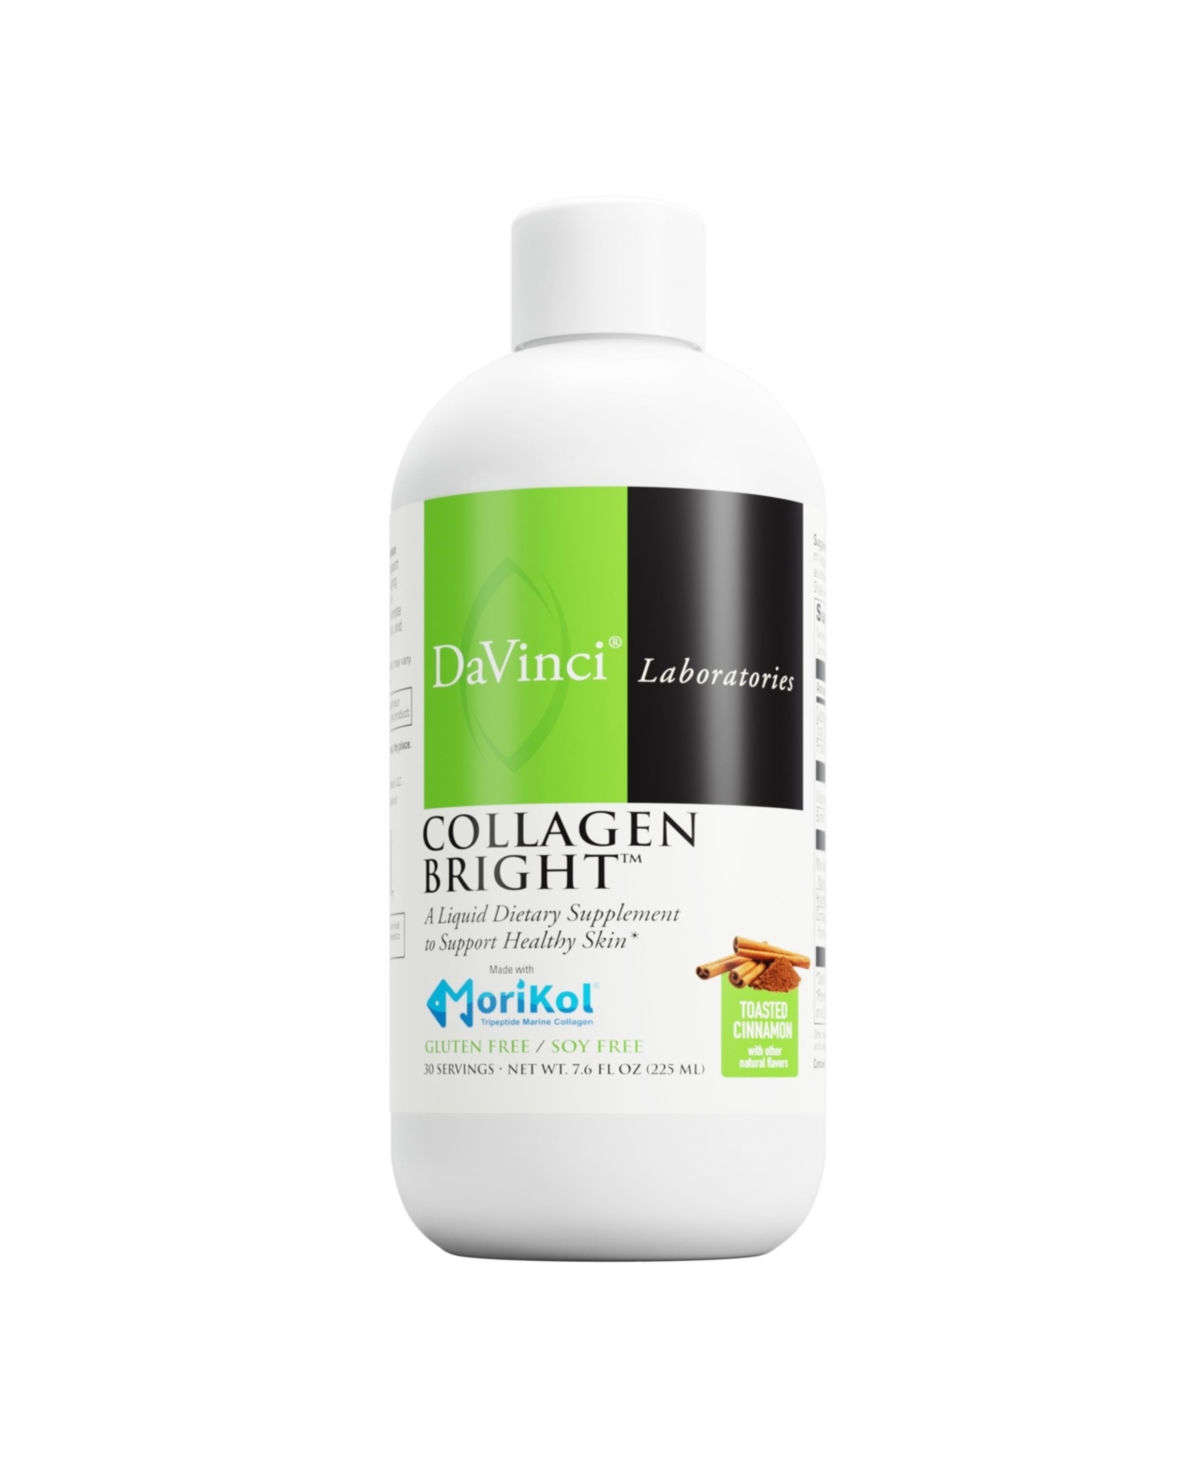 Collagen Bright - A Liquid Dietary Supplement to Support Healthy Skin - Gluten Free, Soy Free - Toasted Cinnamon - Brown